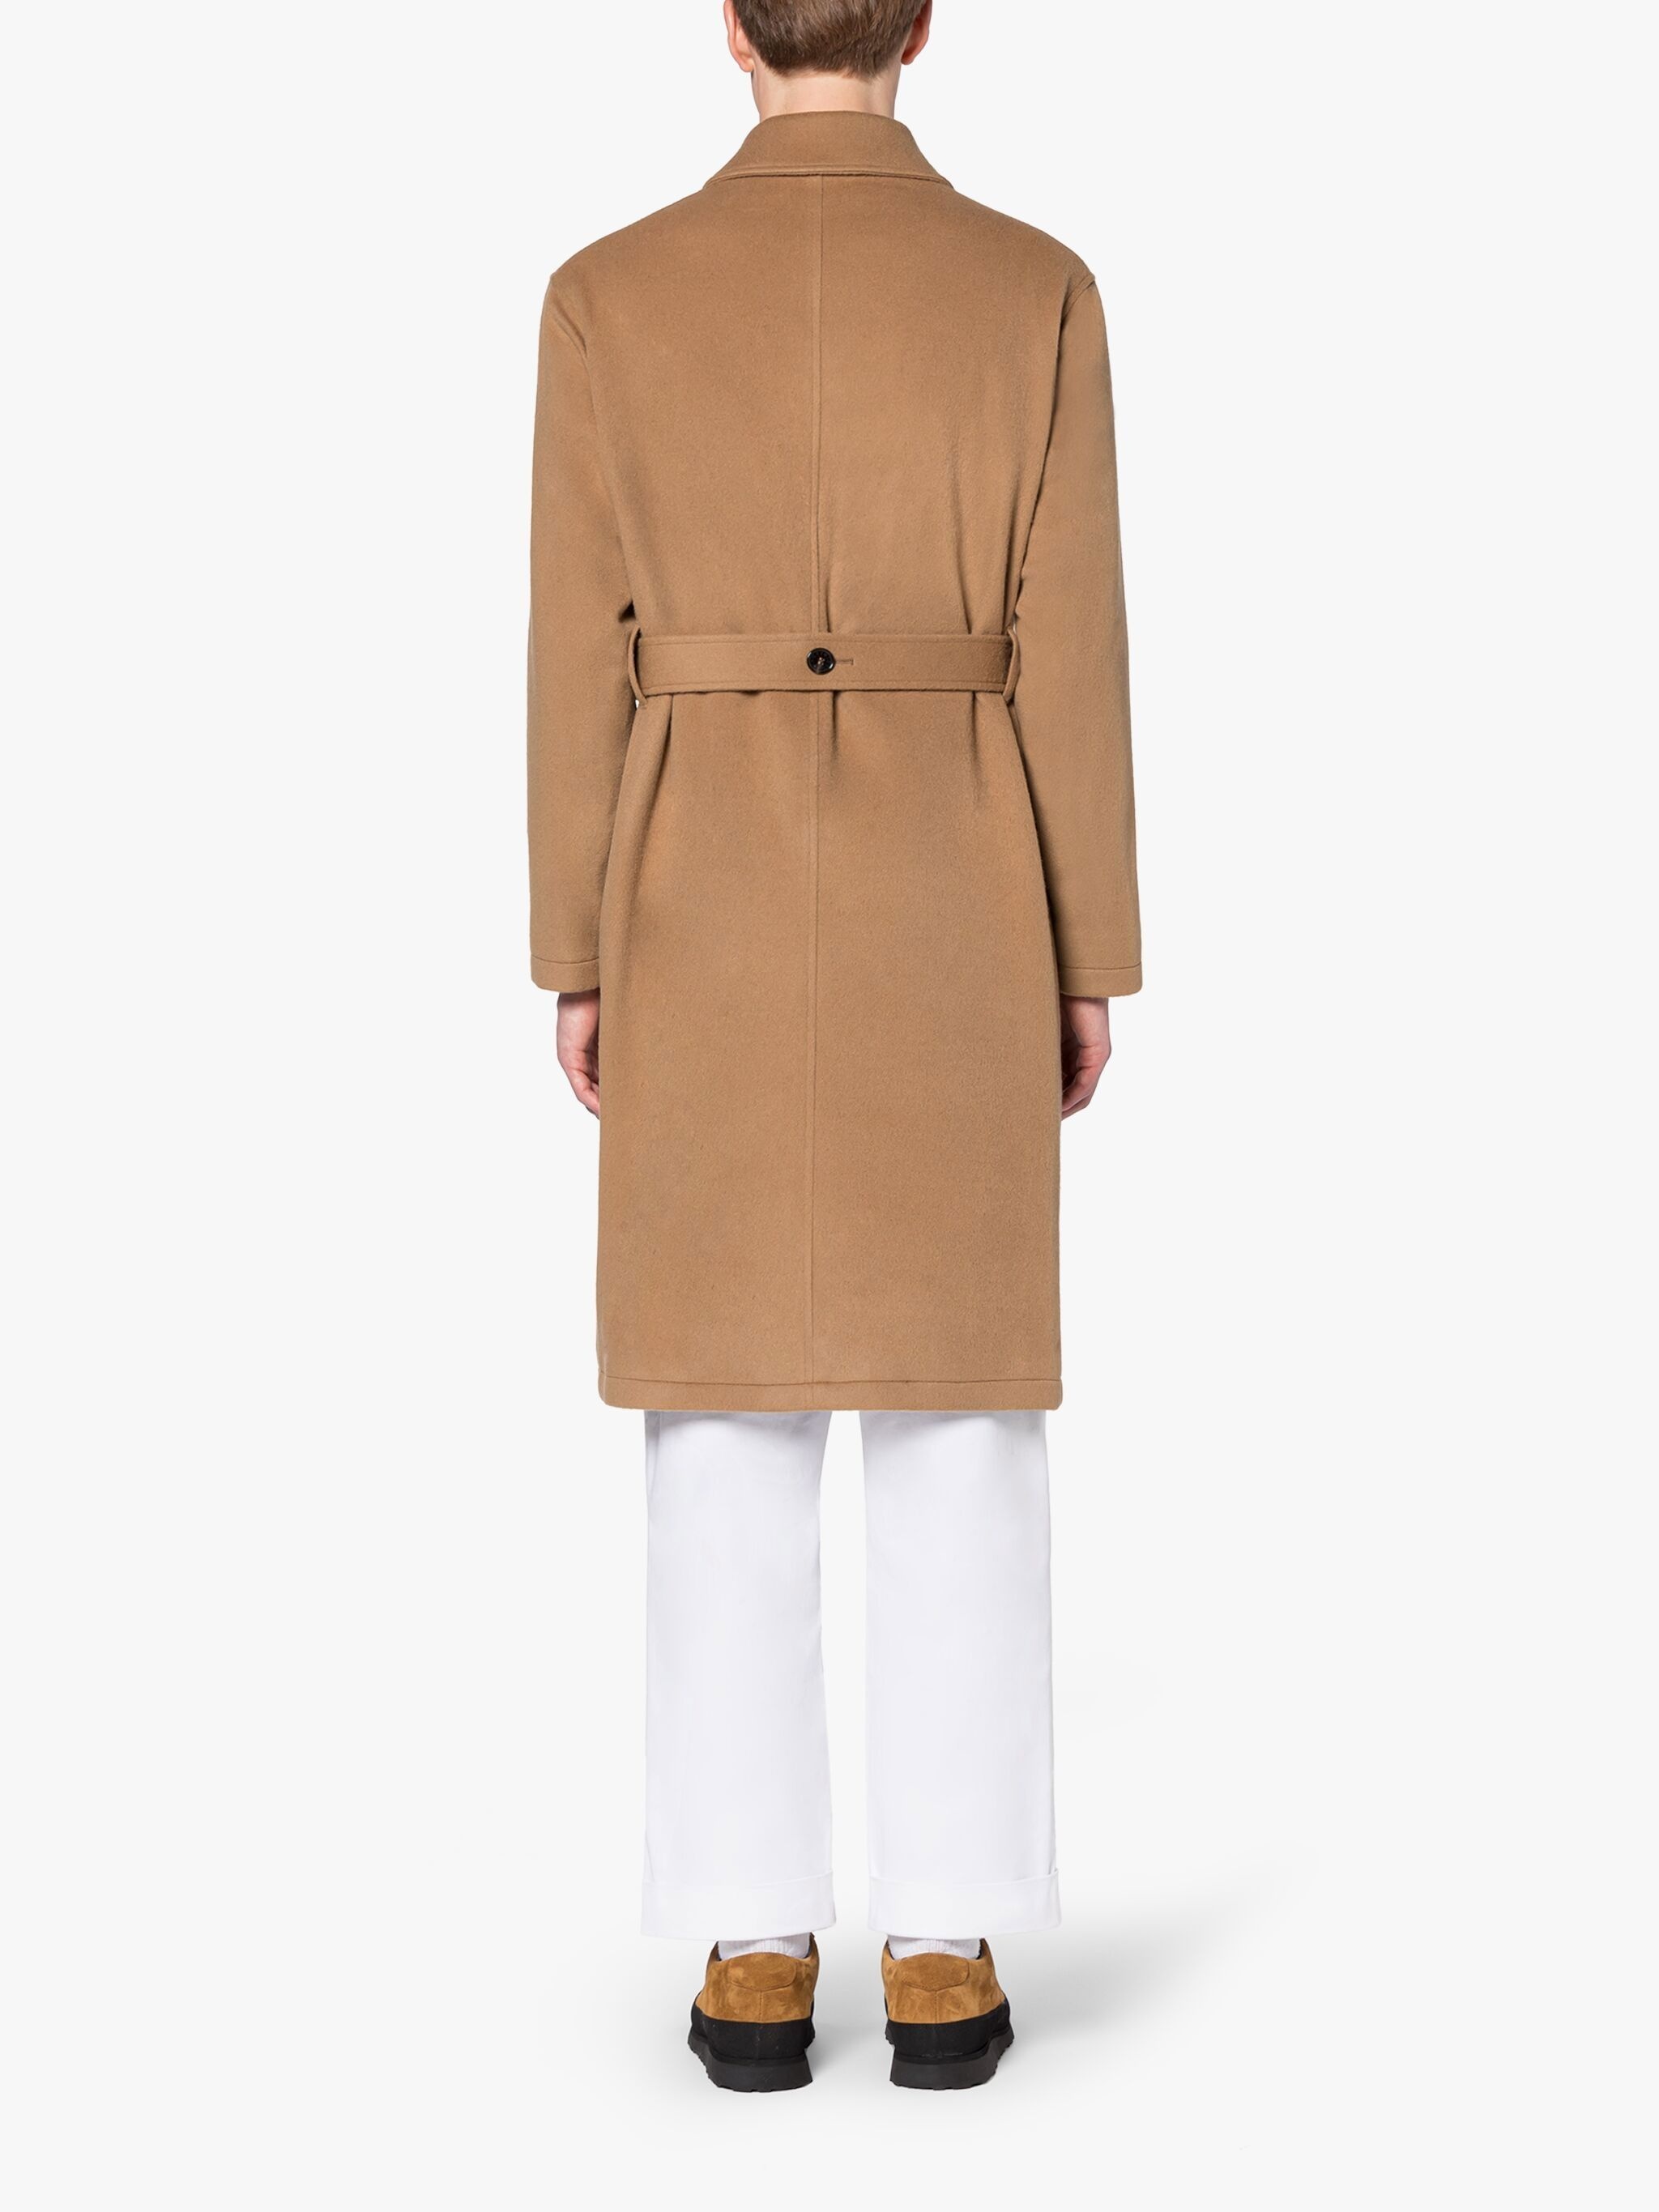 MILAN BEIGE WOOL & CASHMERE SINGLE-BREASTED TRENCH COAT - 3